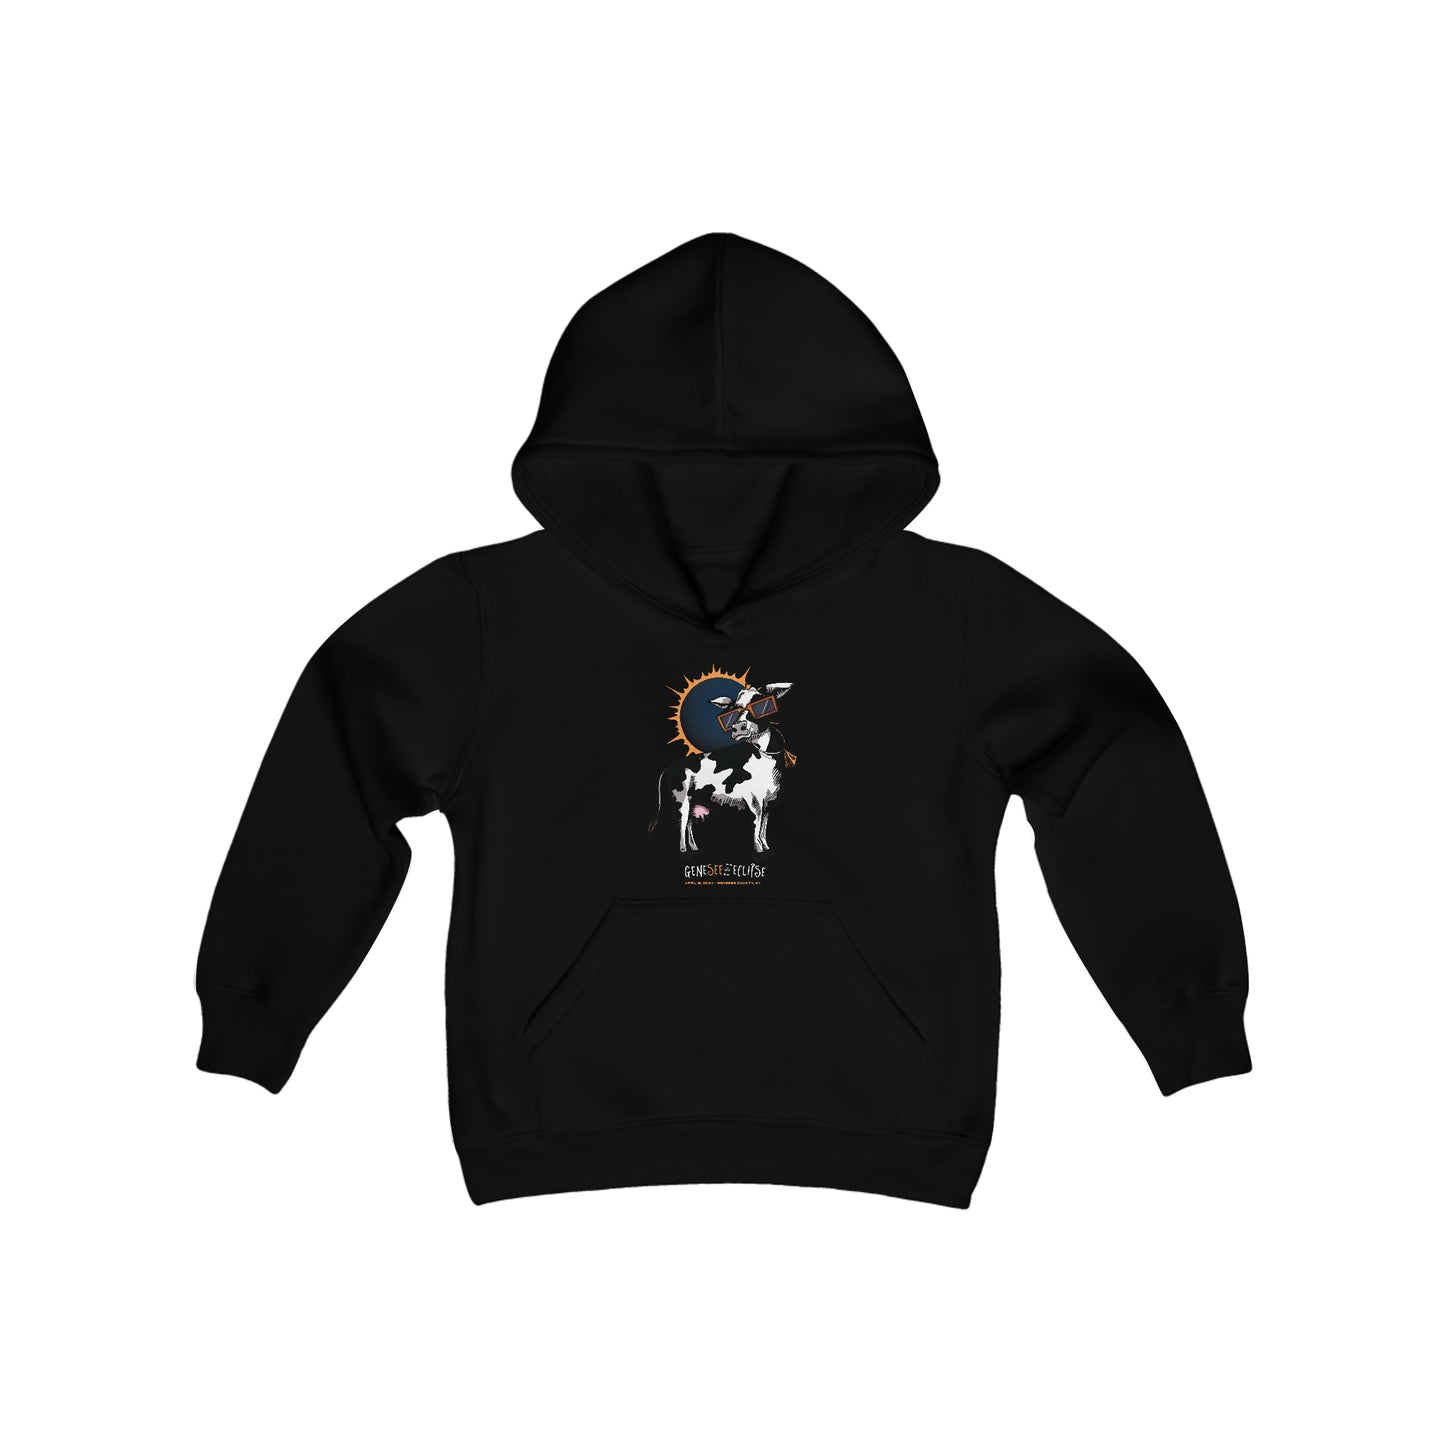 Genny Eclipse Mascot - Youth Hoodie